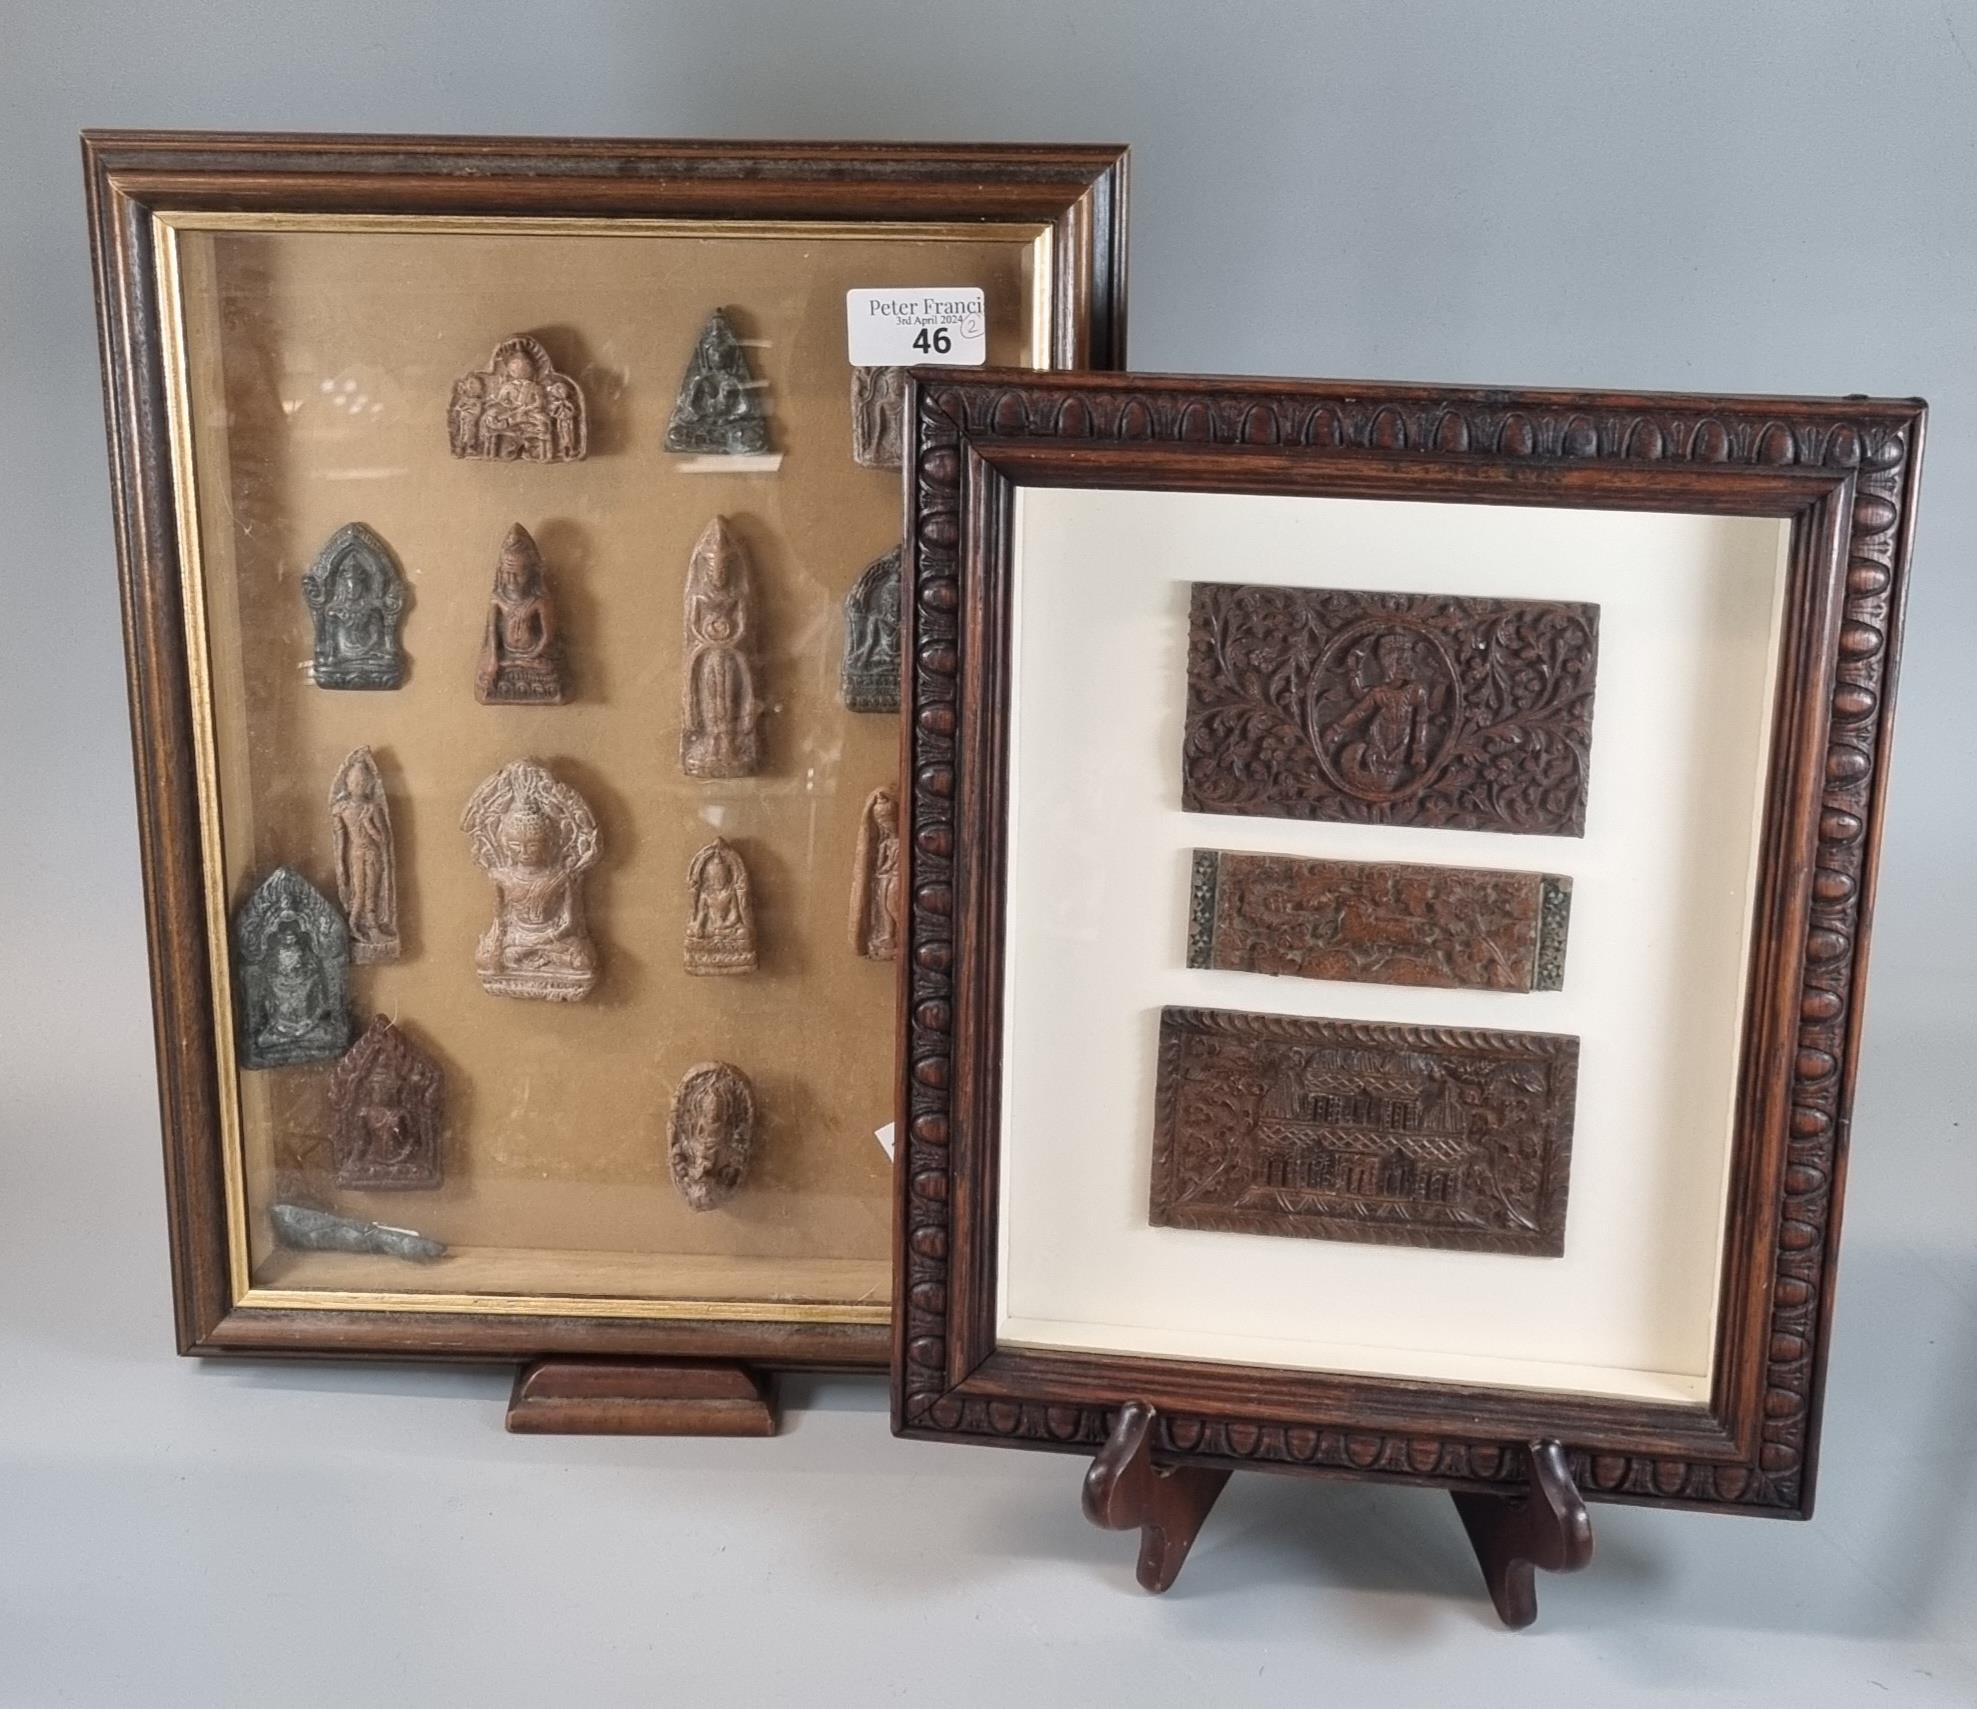 Group of appearing carved devotional figures mounted in a wooden glass fronted display frame